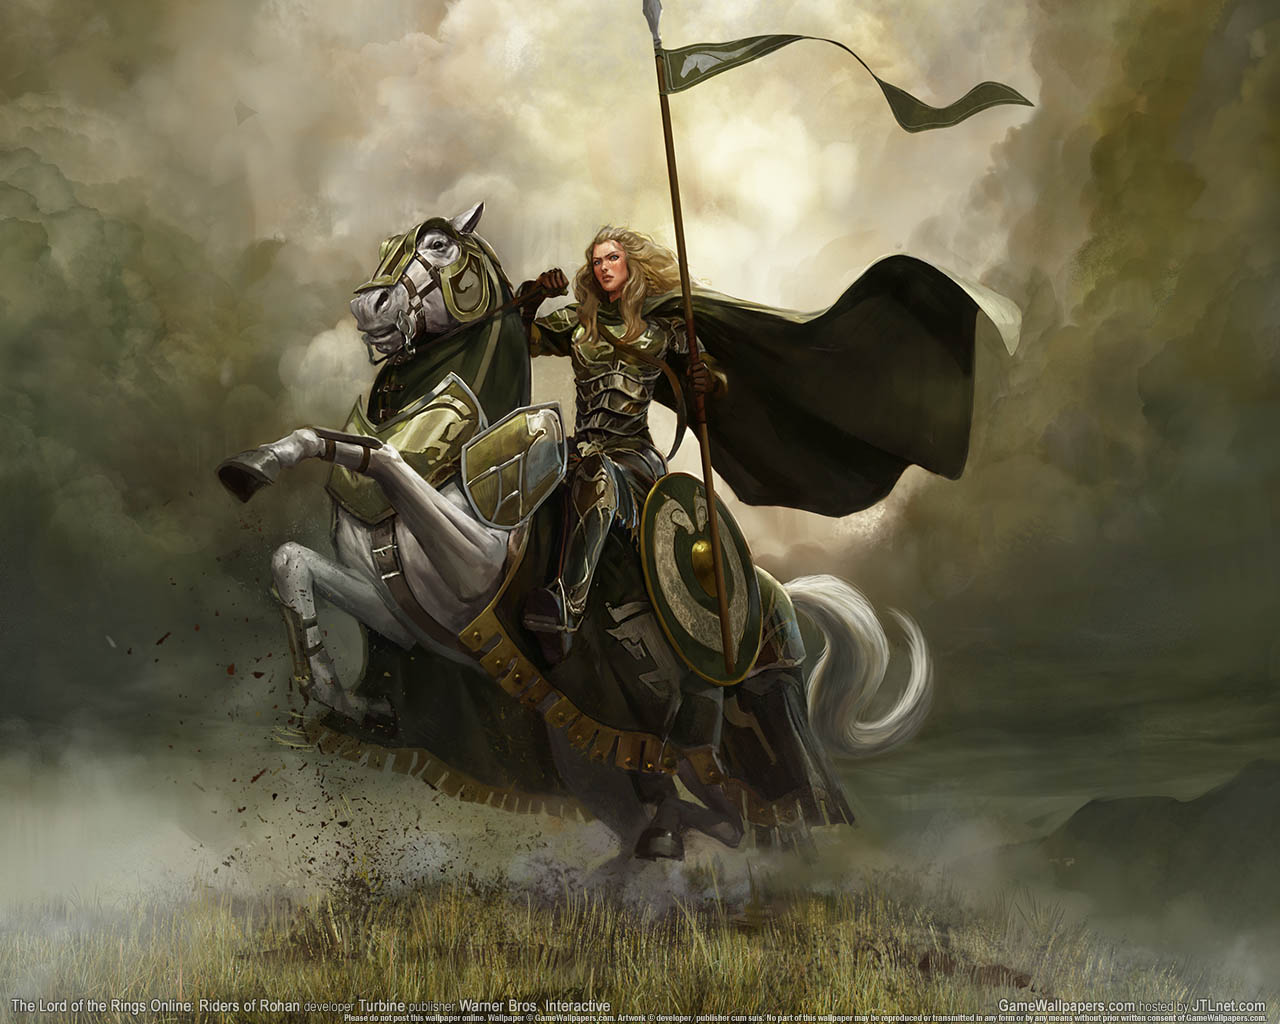 The Lord of the Rings Online: Riders of Rohan achtergrond 02 1280x1024